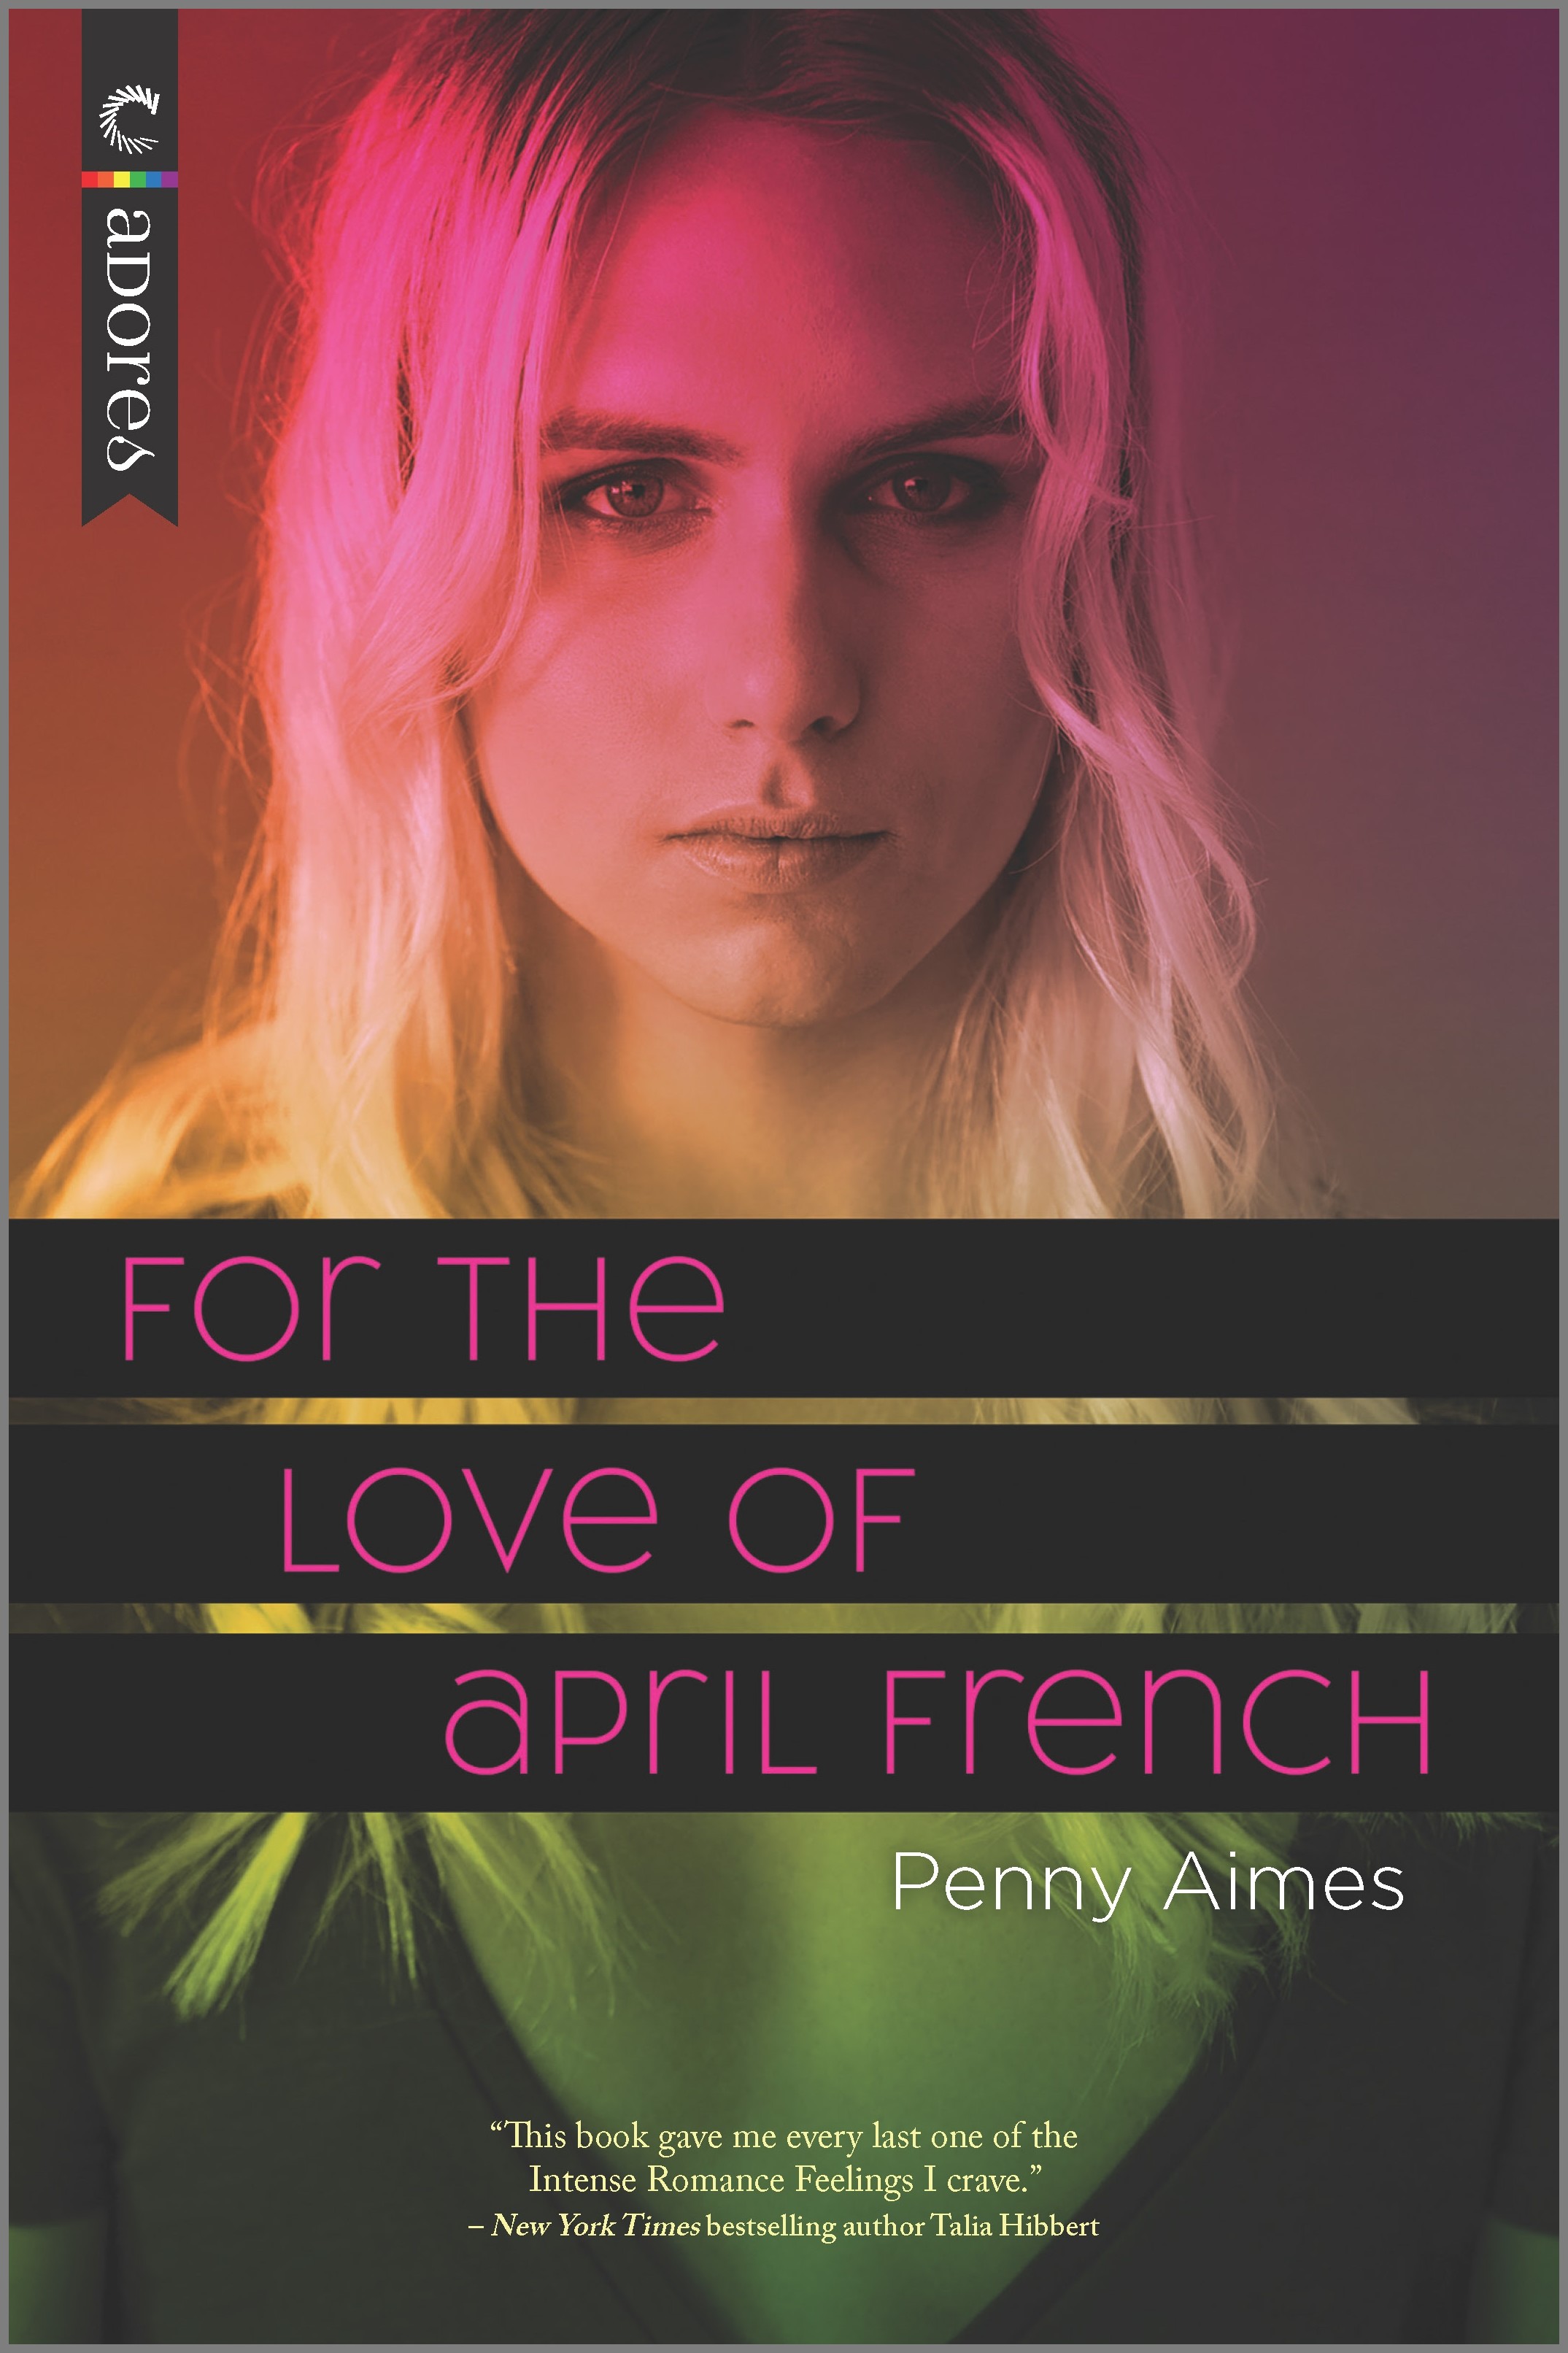 Cover Image of For the Love of April French